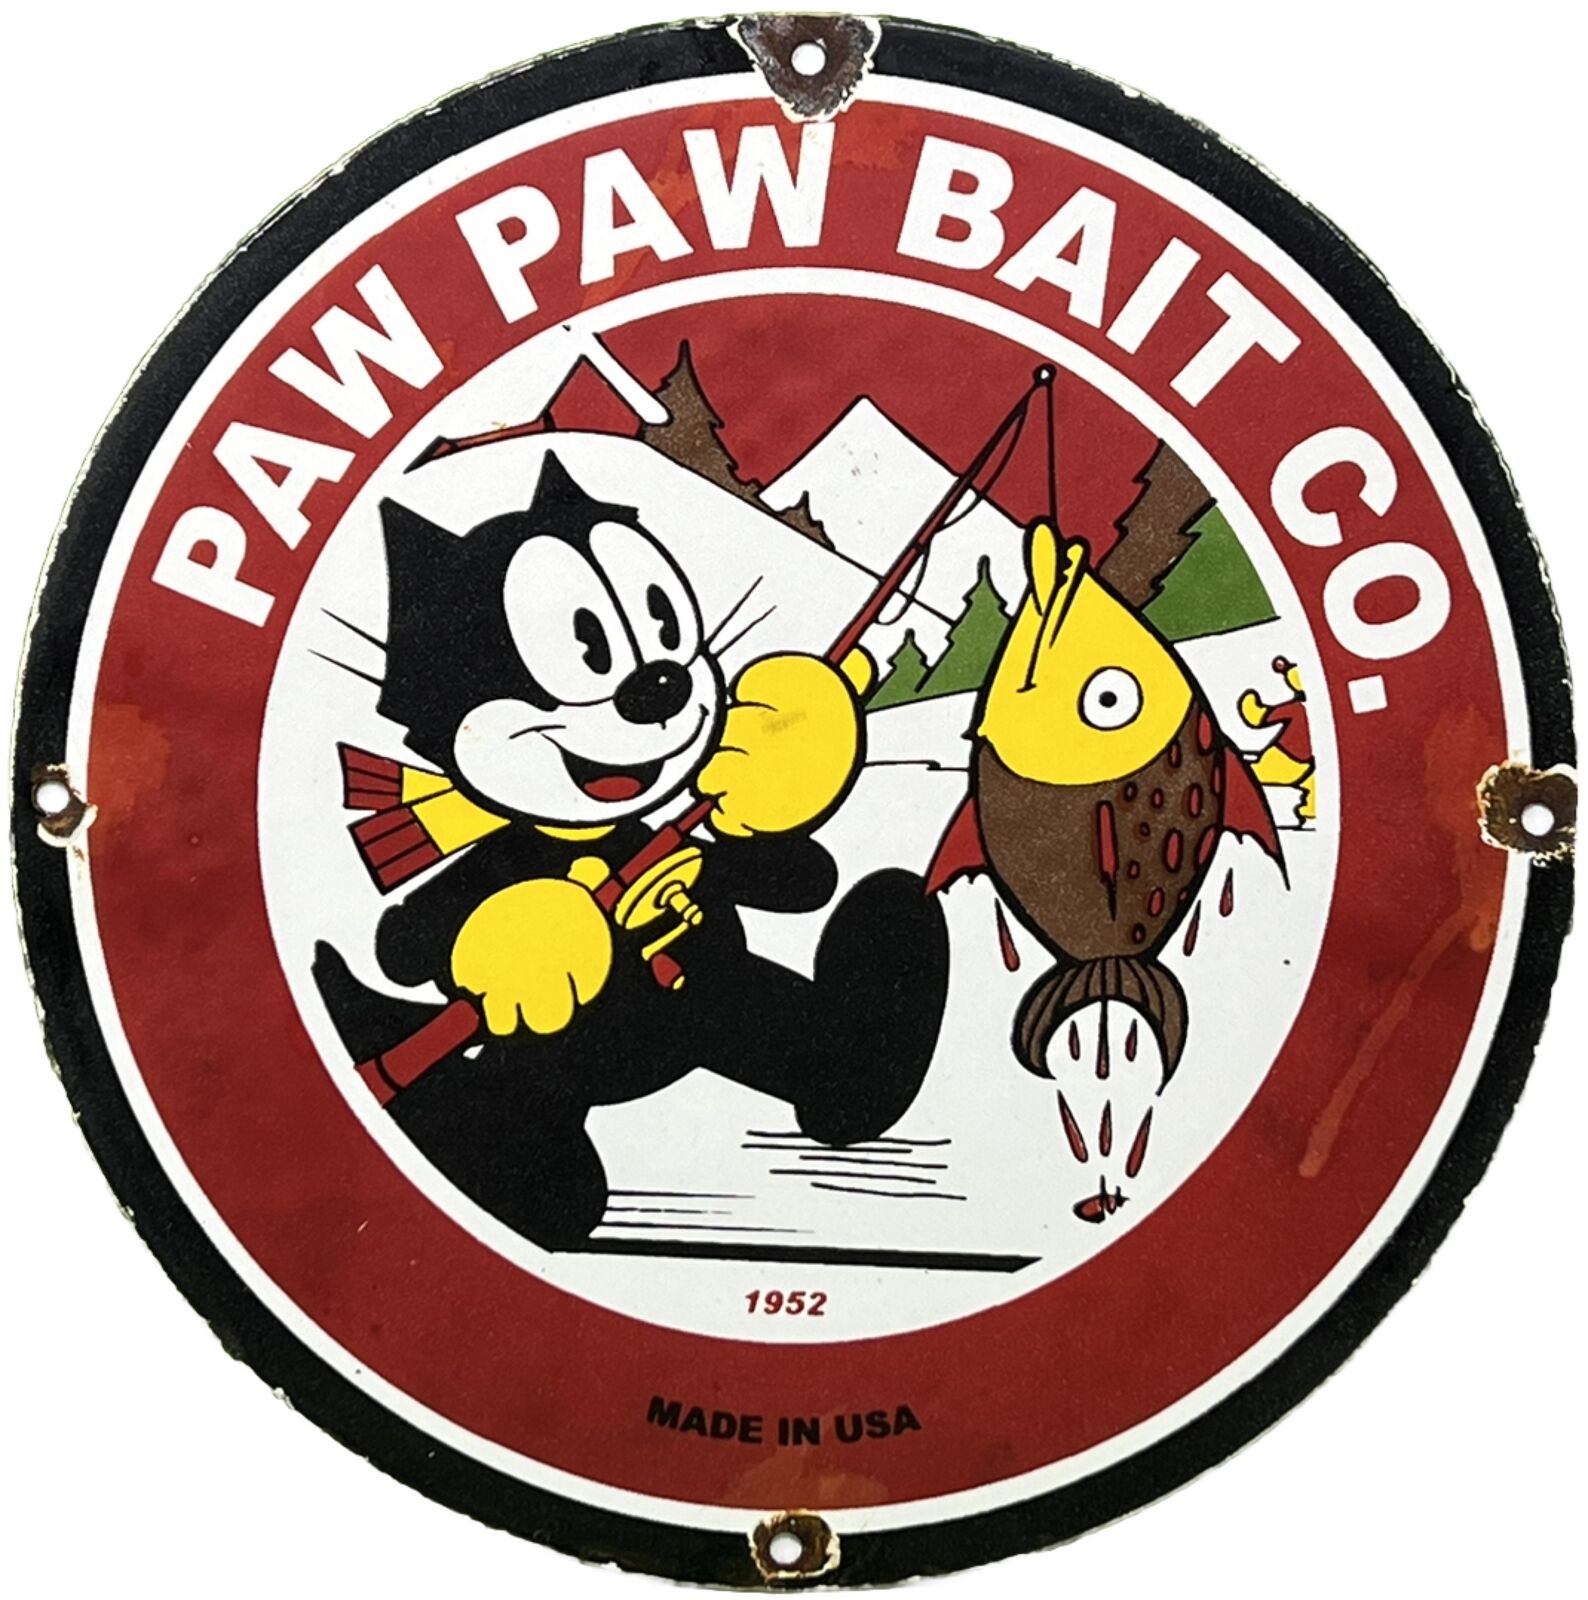 VINTAGE PAW PAW TACKLE FISHING LURES PORCELAIN SIGN GAS BAIT OUTBOARD FELIX CAT